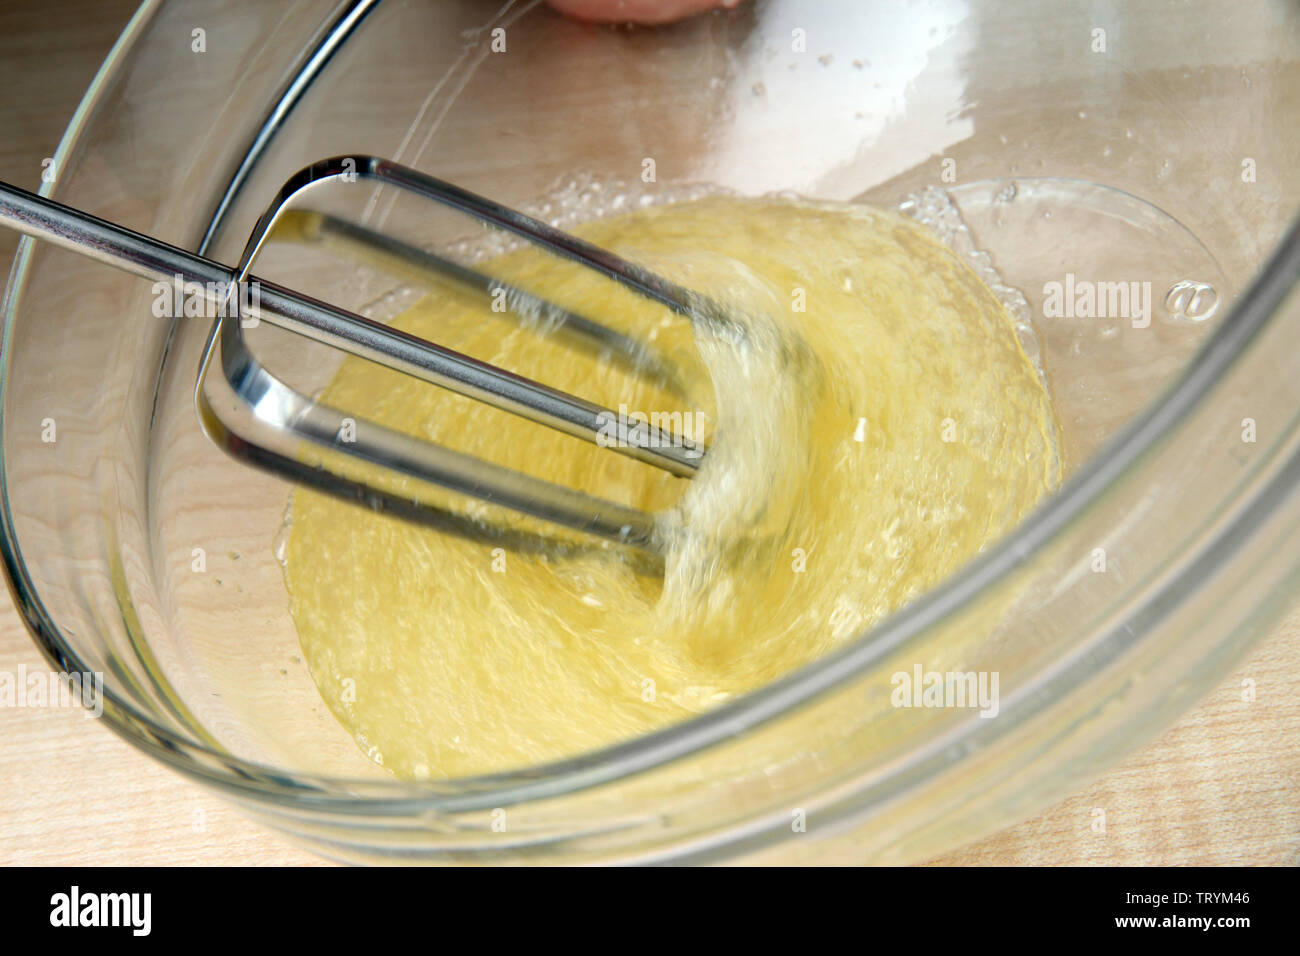 https://c8.alamy.com/comp/TRYM46/cooking-whipping-eggs-with-electric-whisk-in-bowl-close-up-TRYM46.jpg